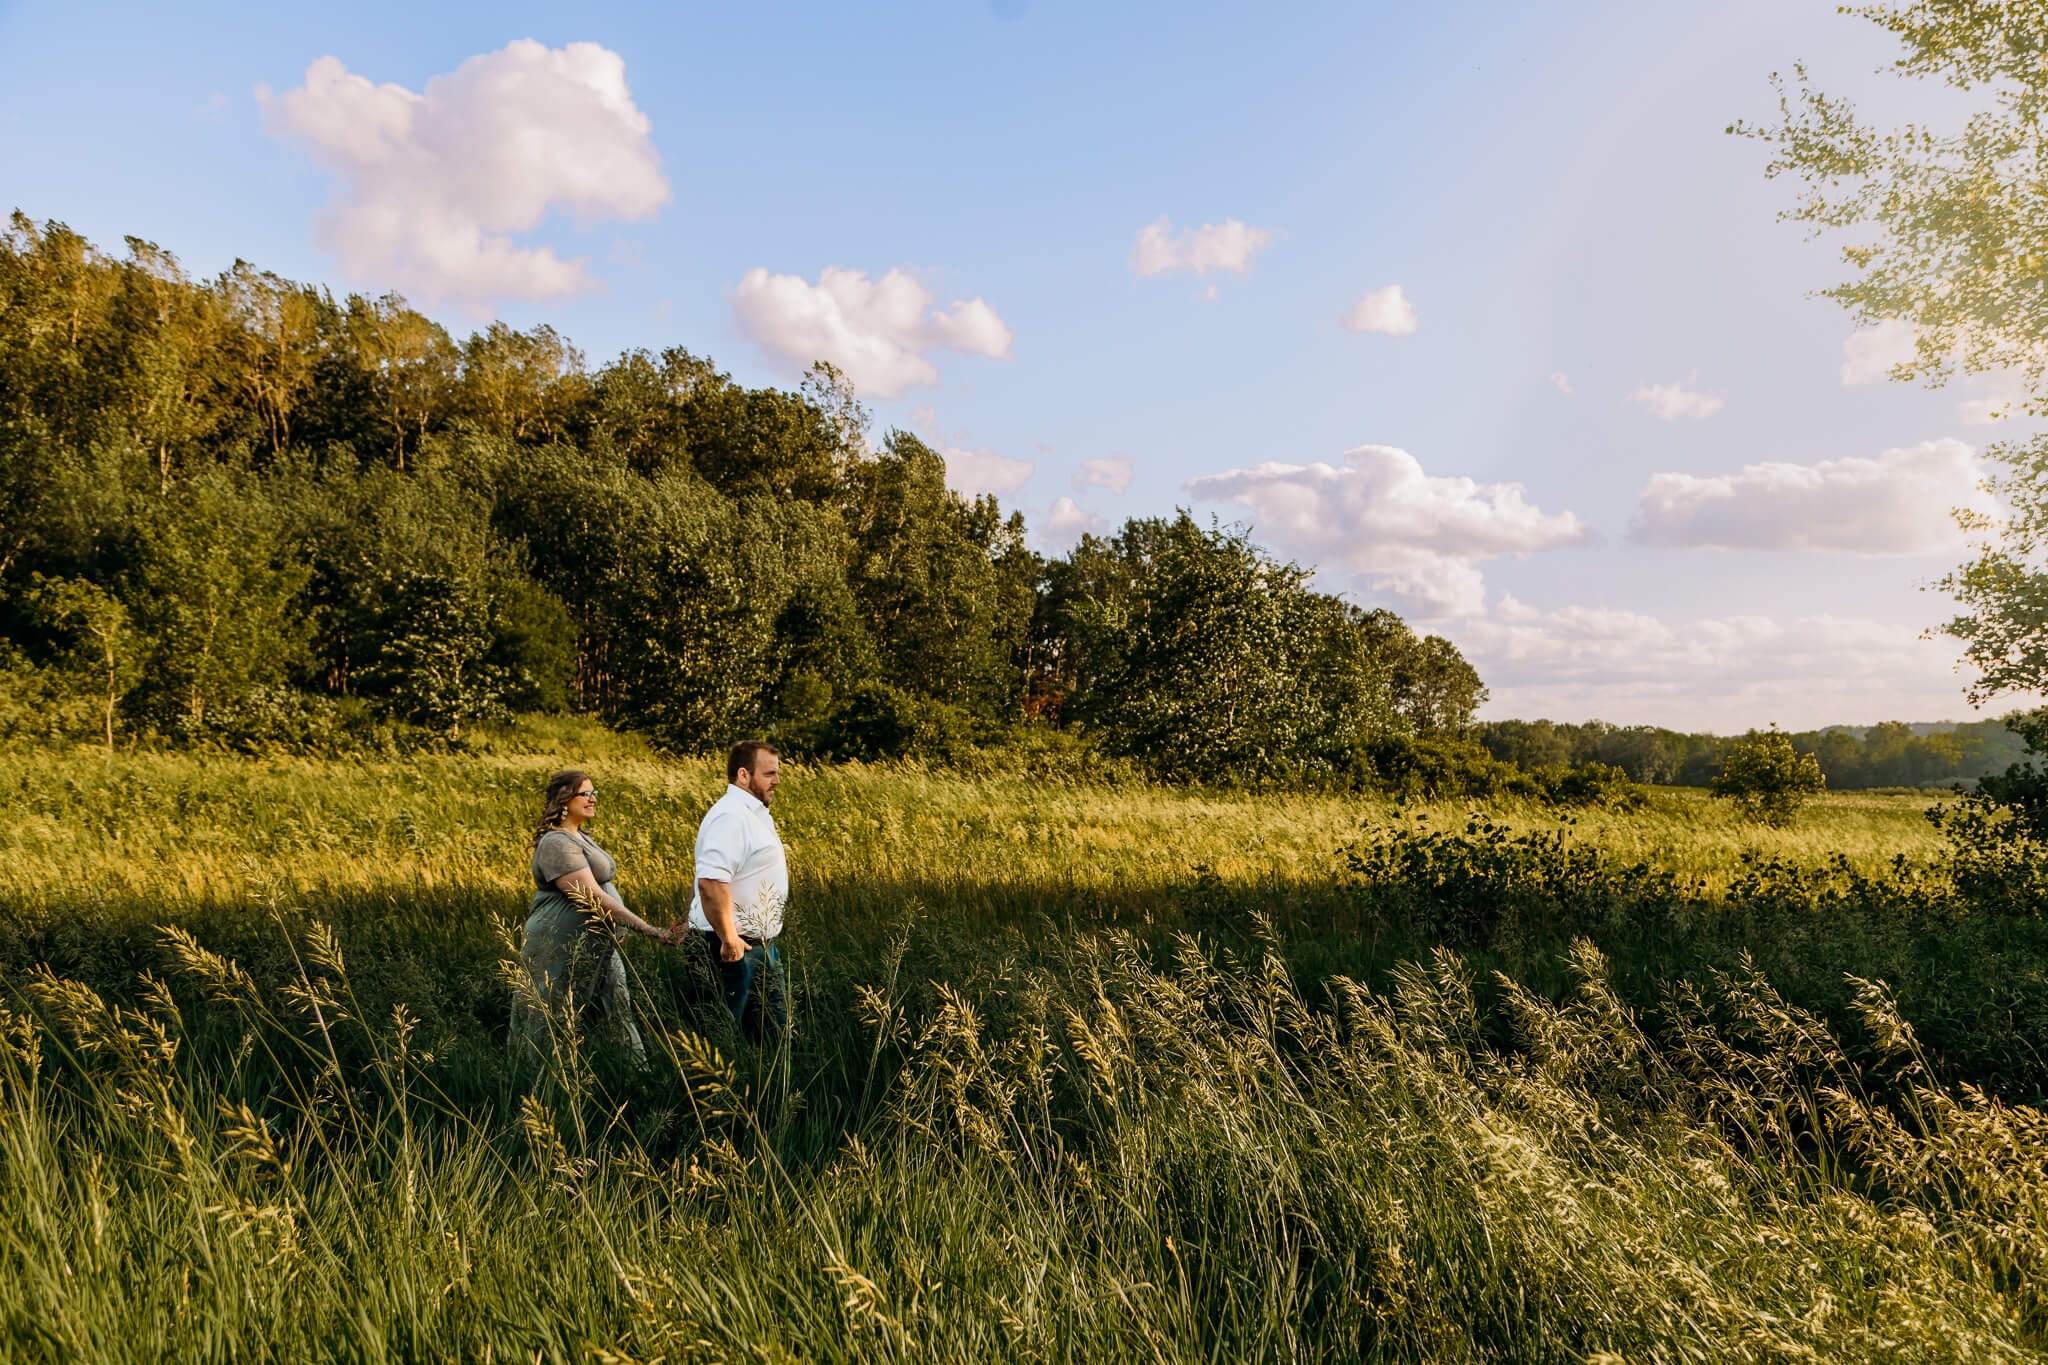 A husband leads his pregnant wife through a field of tall grass at sunset after visiting confluence chiropractic